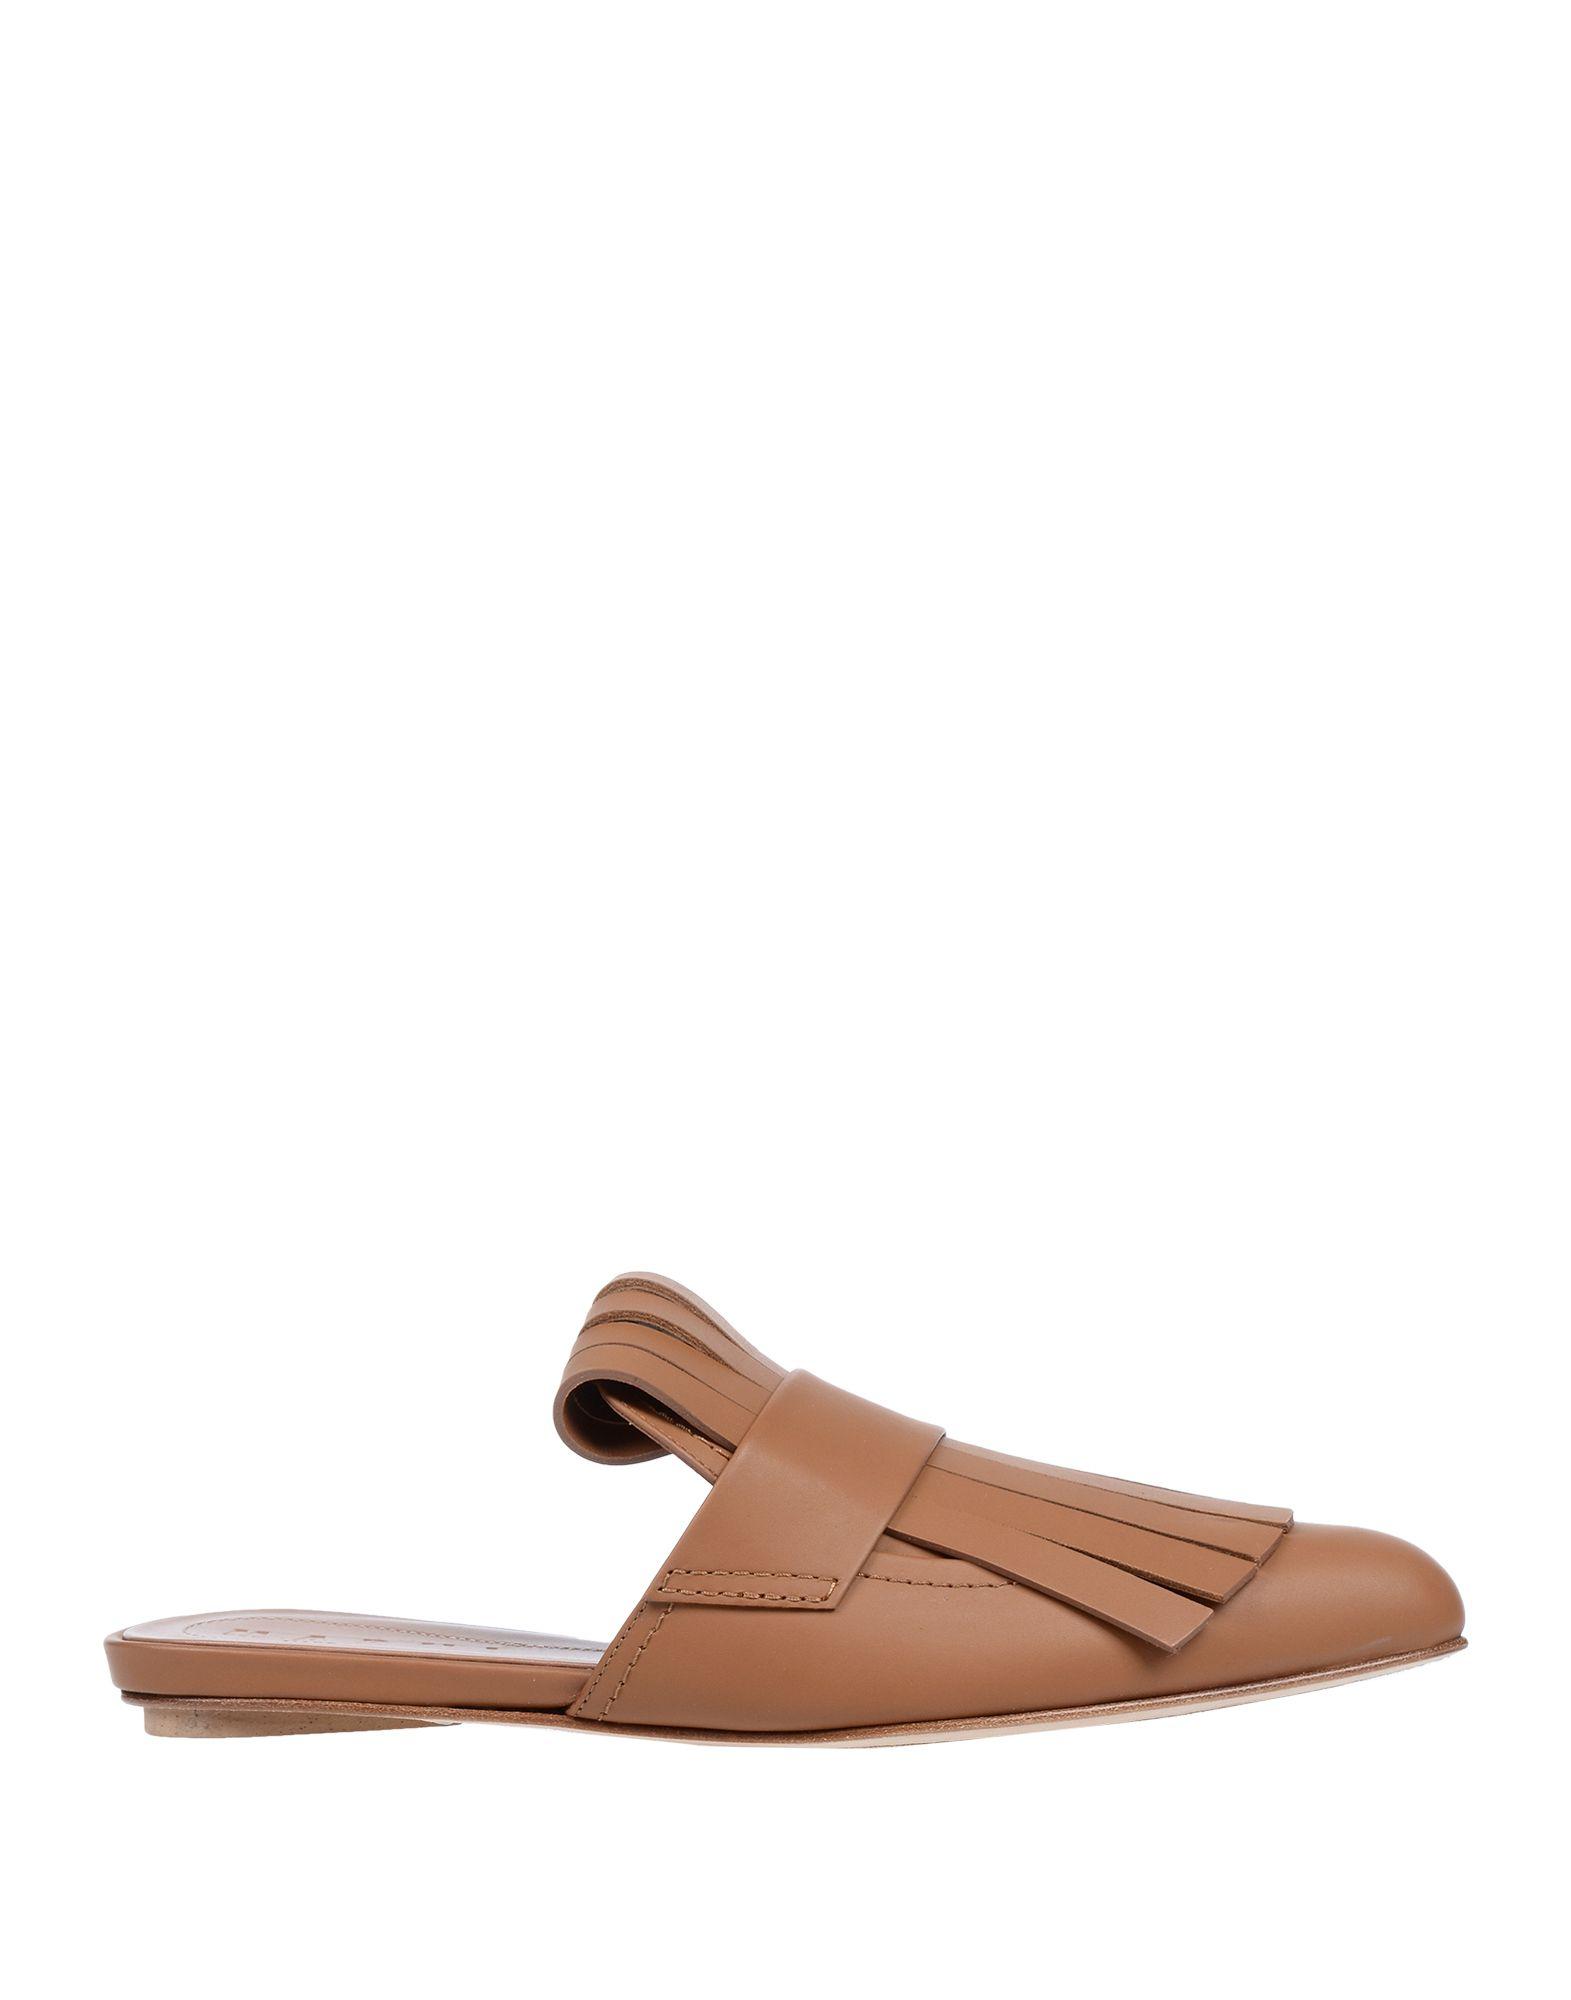 Marni Leather Mules in Camel (Brown) - Lyst